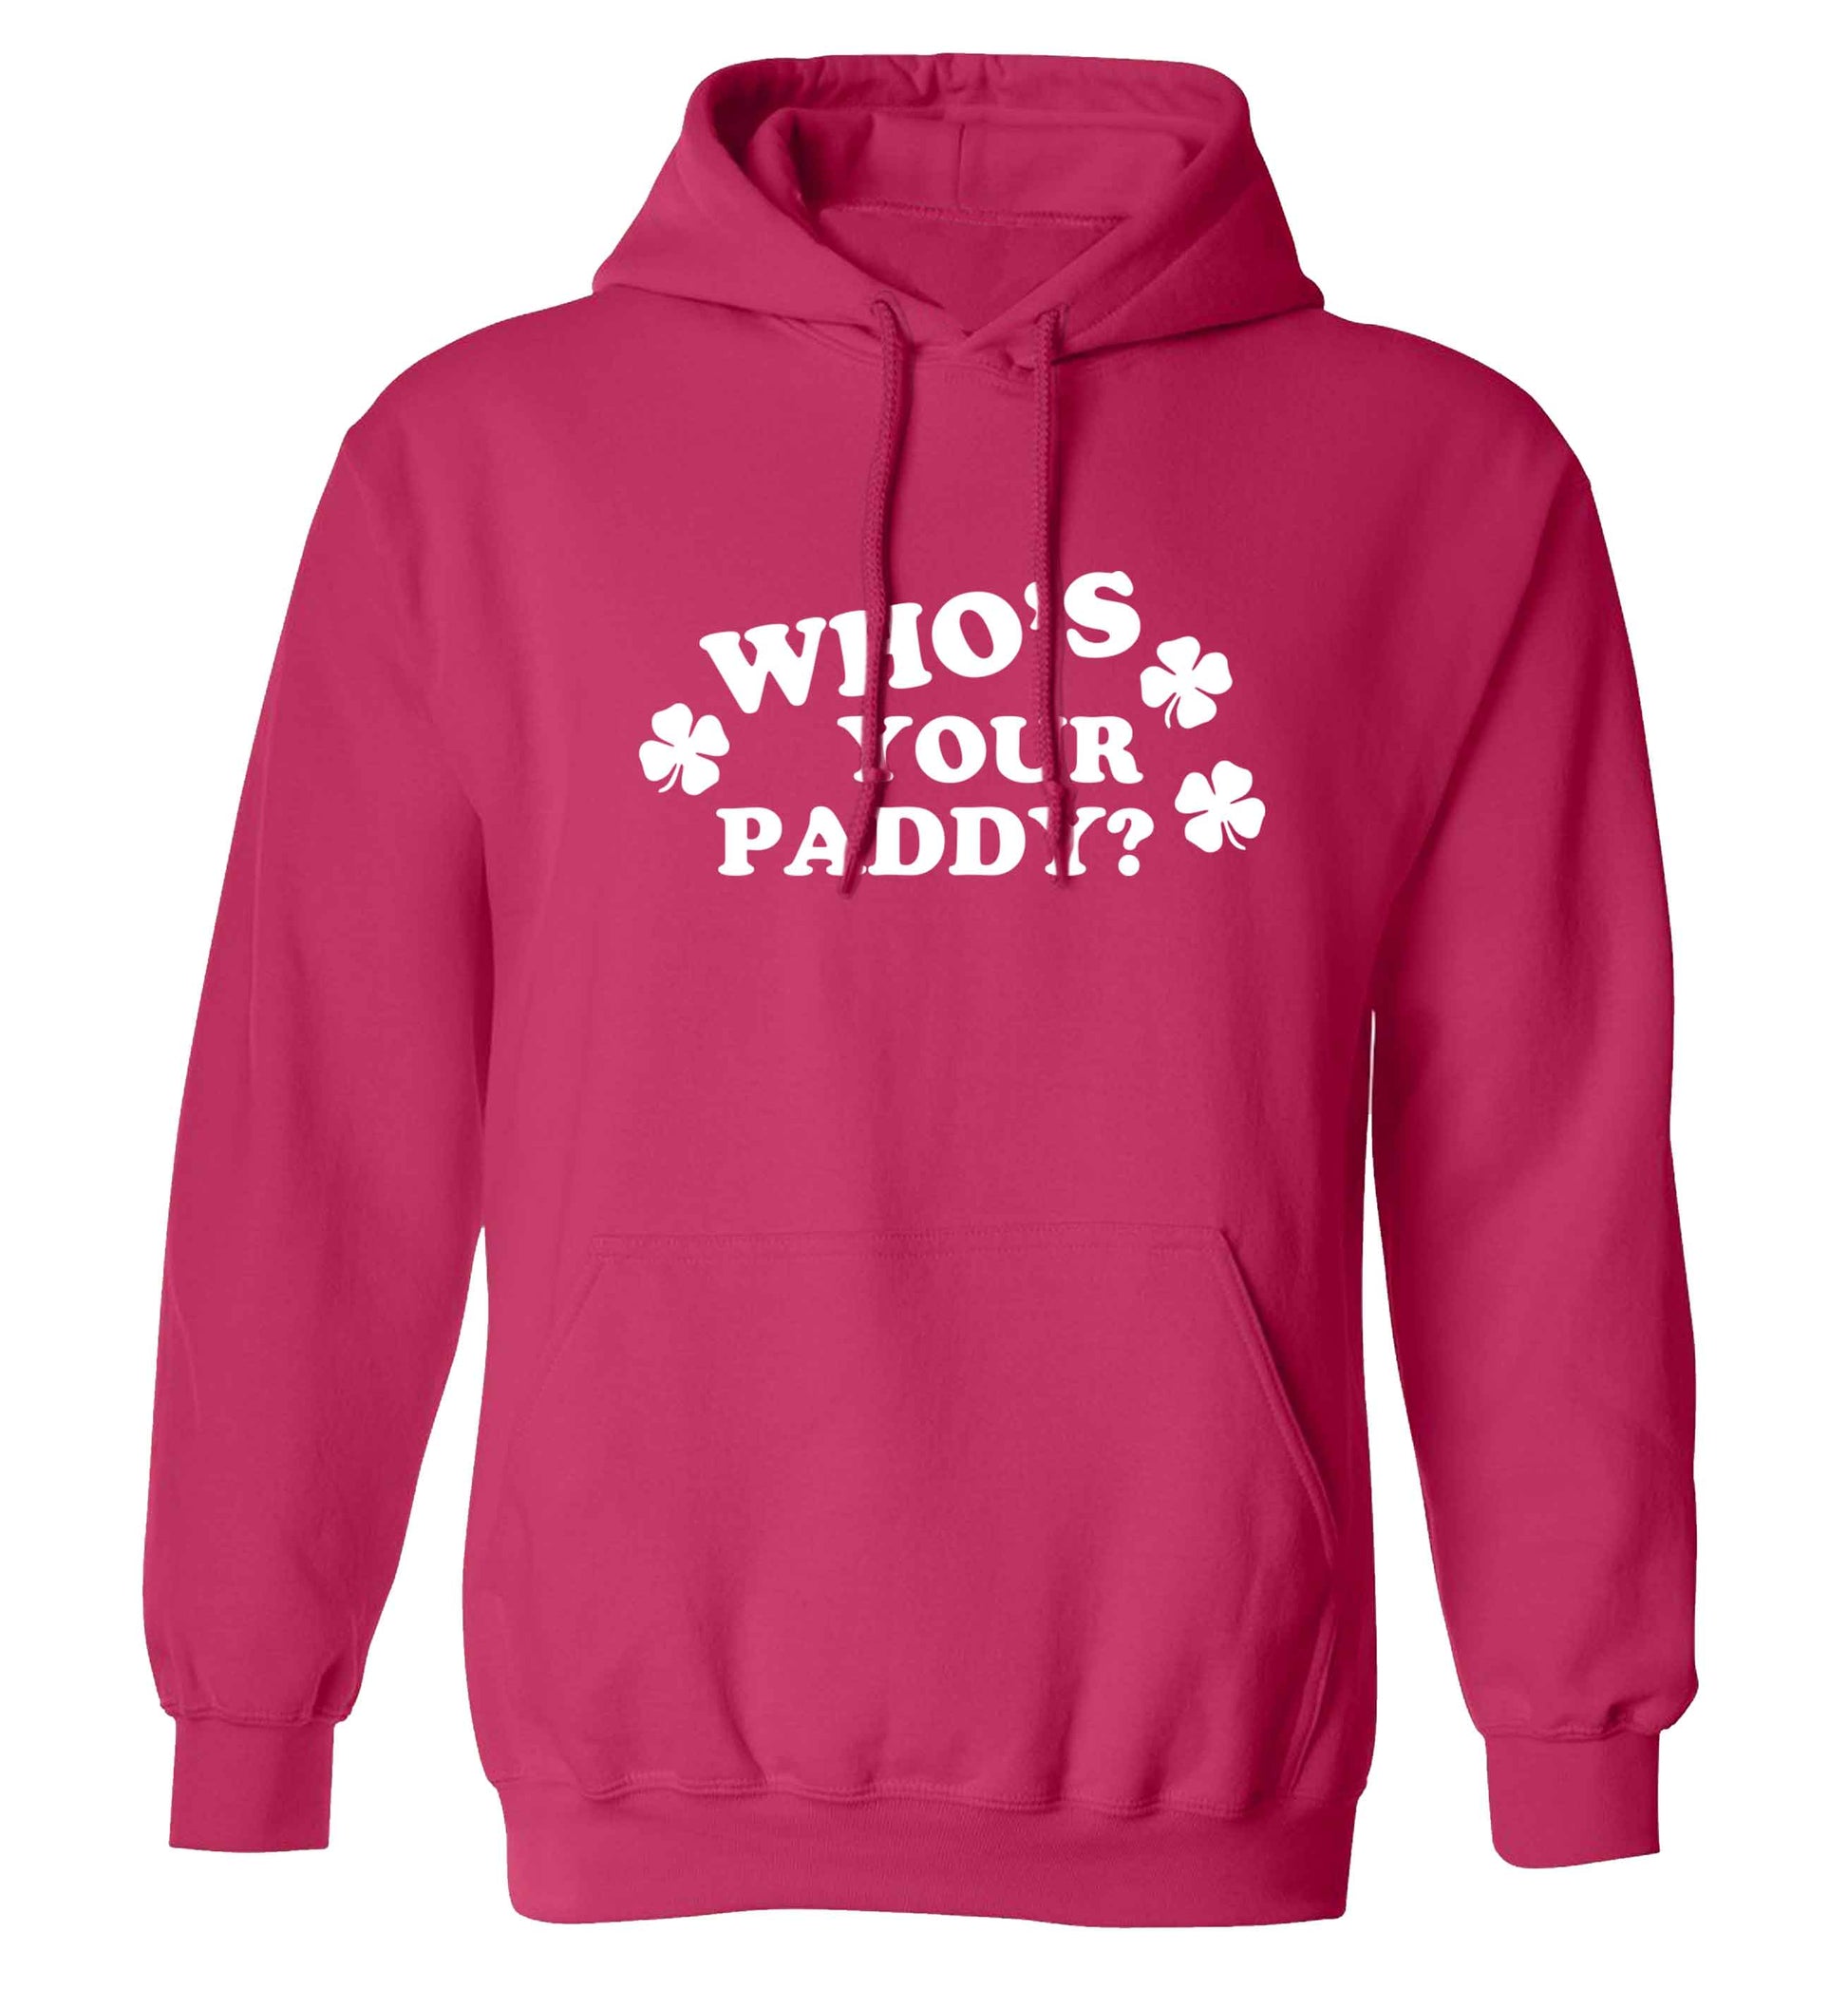 Who's your paddy? adults unisex pink hoodie 2XL